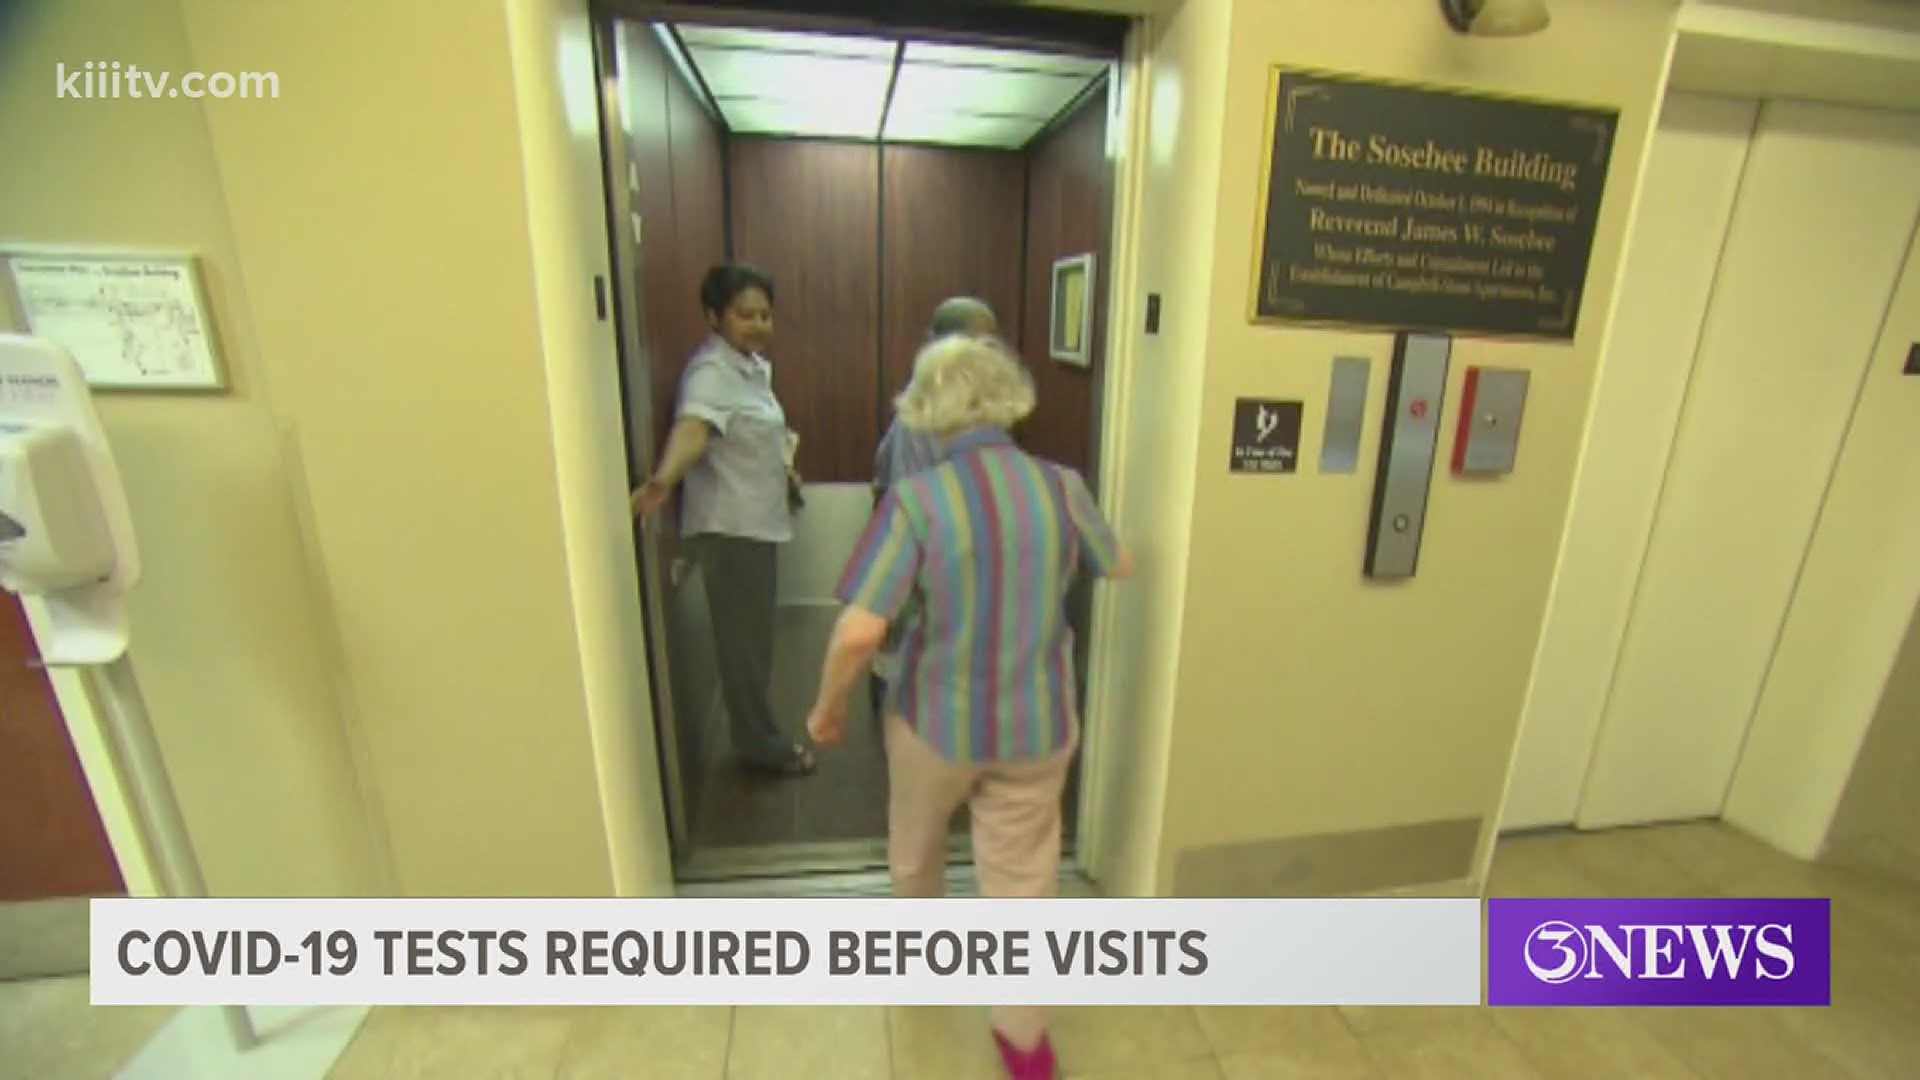 Visitors are expected the test negative for COVID-19 before they are able to visit their loved ones.